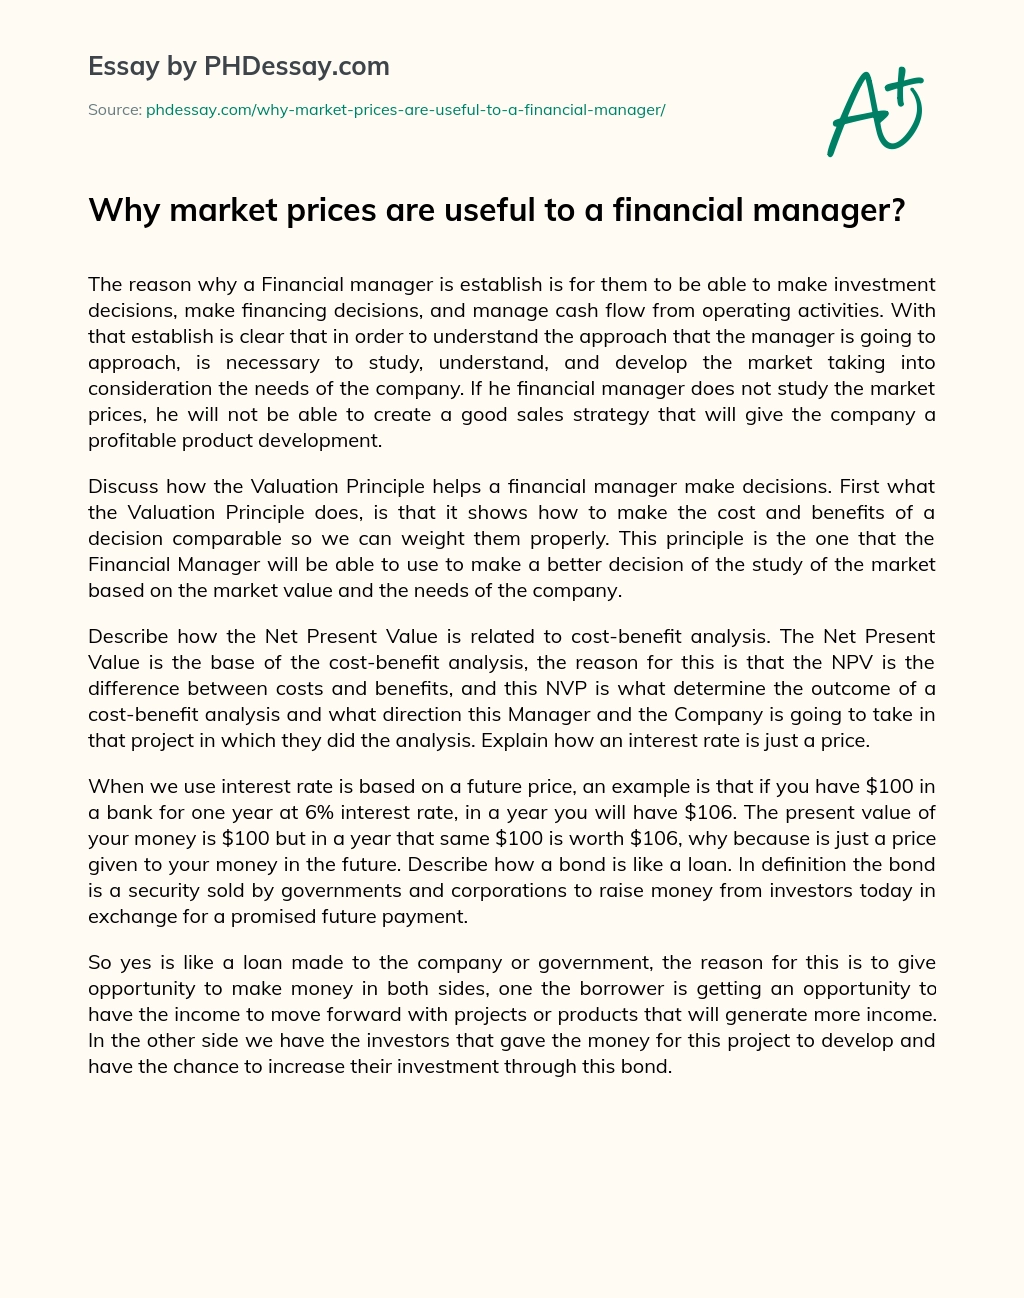 Why market prices are useful to a financial manager? essay